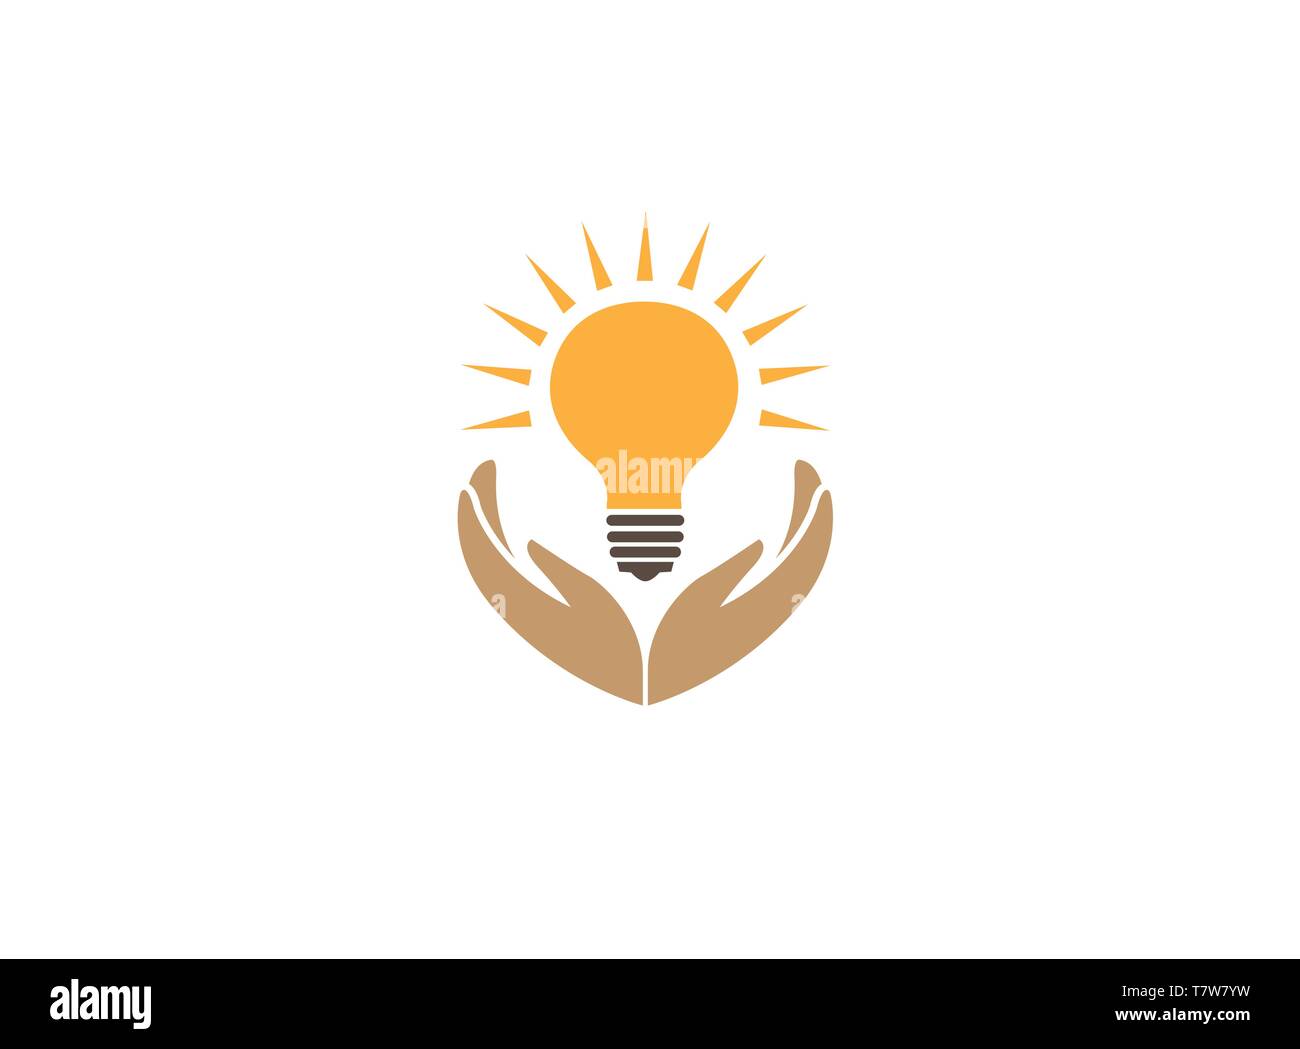 hands holding a lamp with beam to save energy for logo design illustration Stock Vector